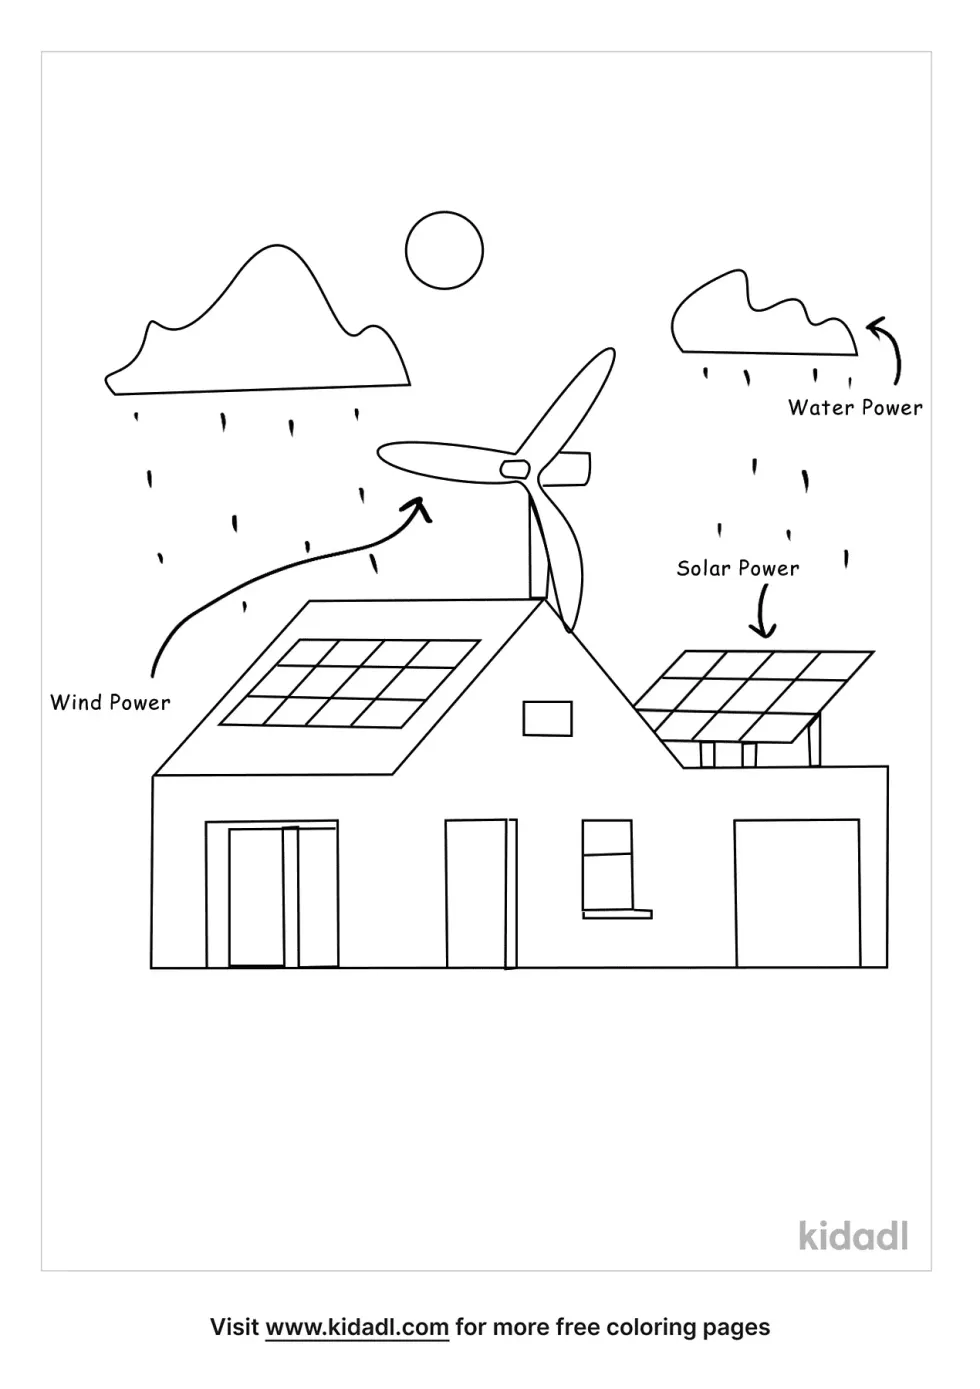 Energy-Efficient Home Coloring Page